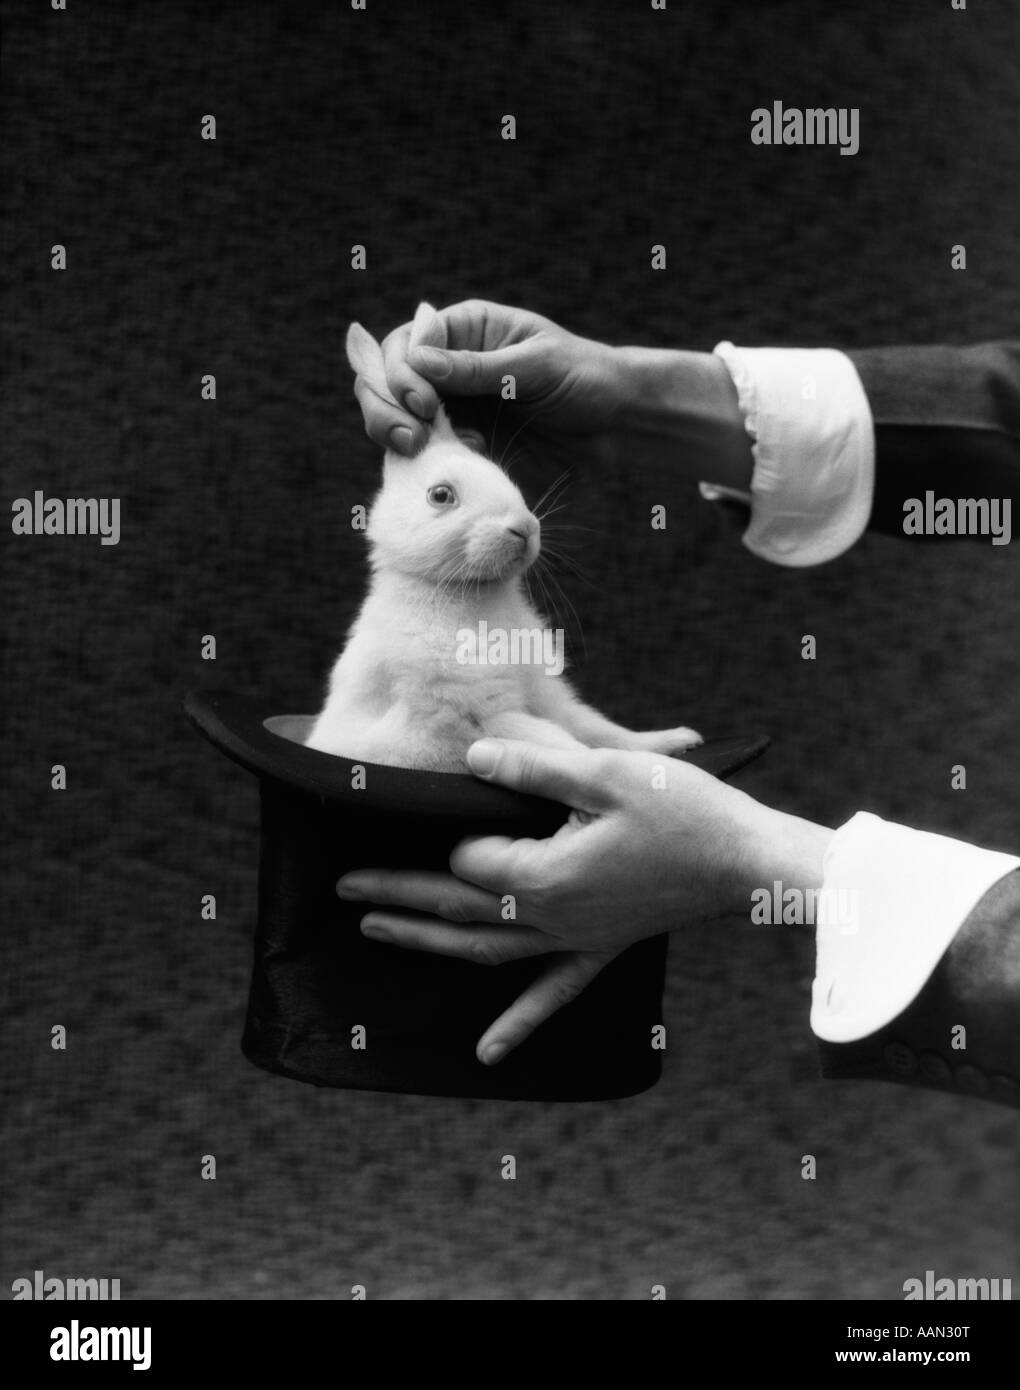 1930s MAGICIAN HANDS PULLING RABBIT OUT OF TOP HAT Stock Photo